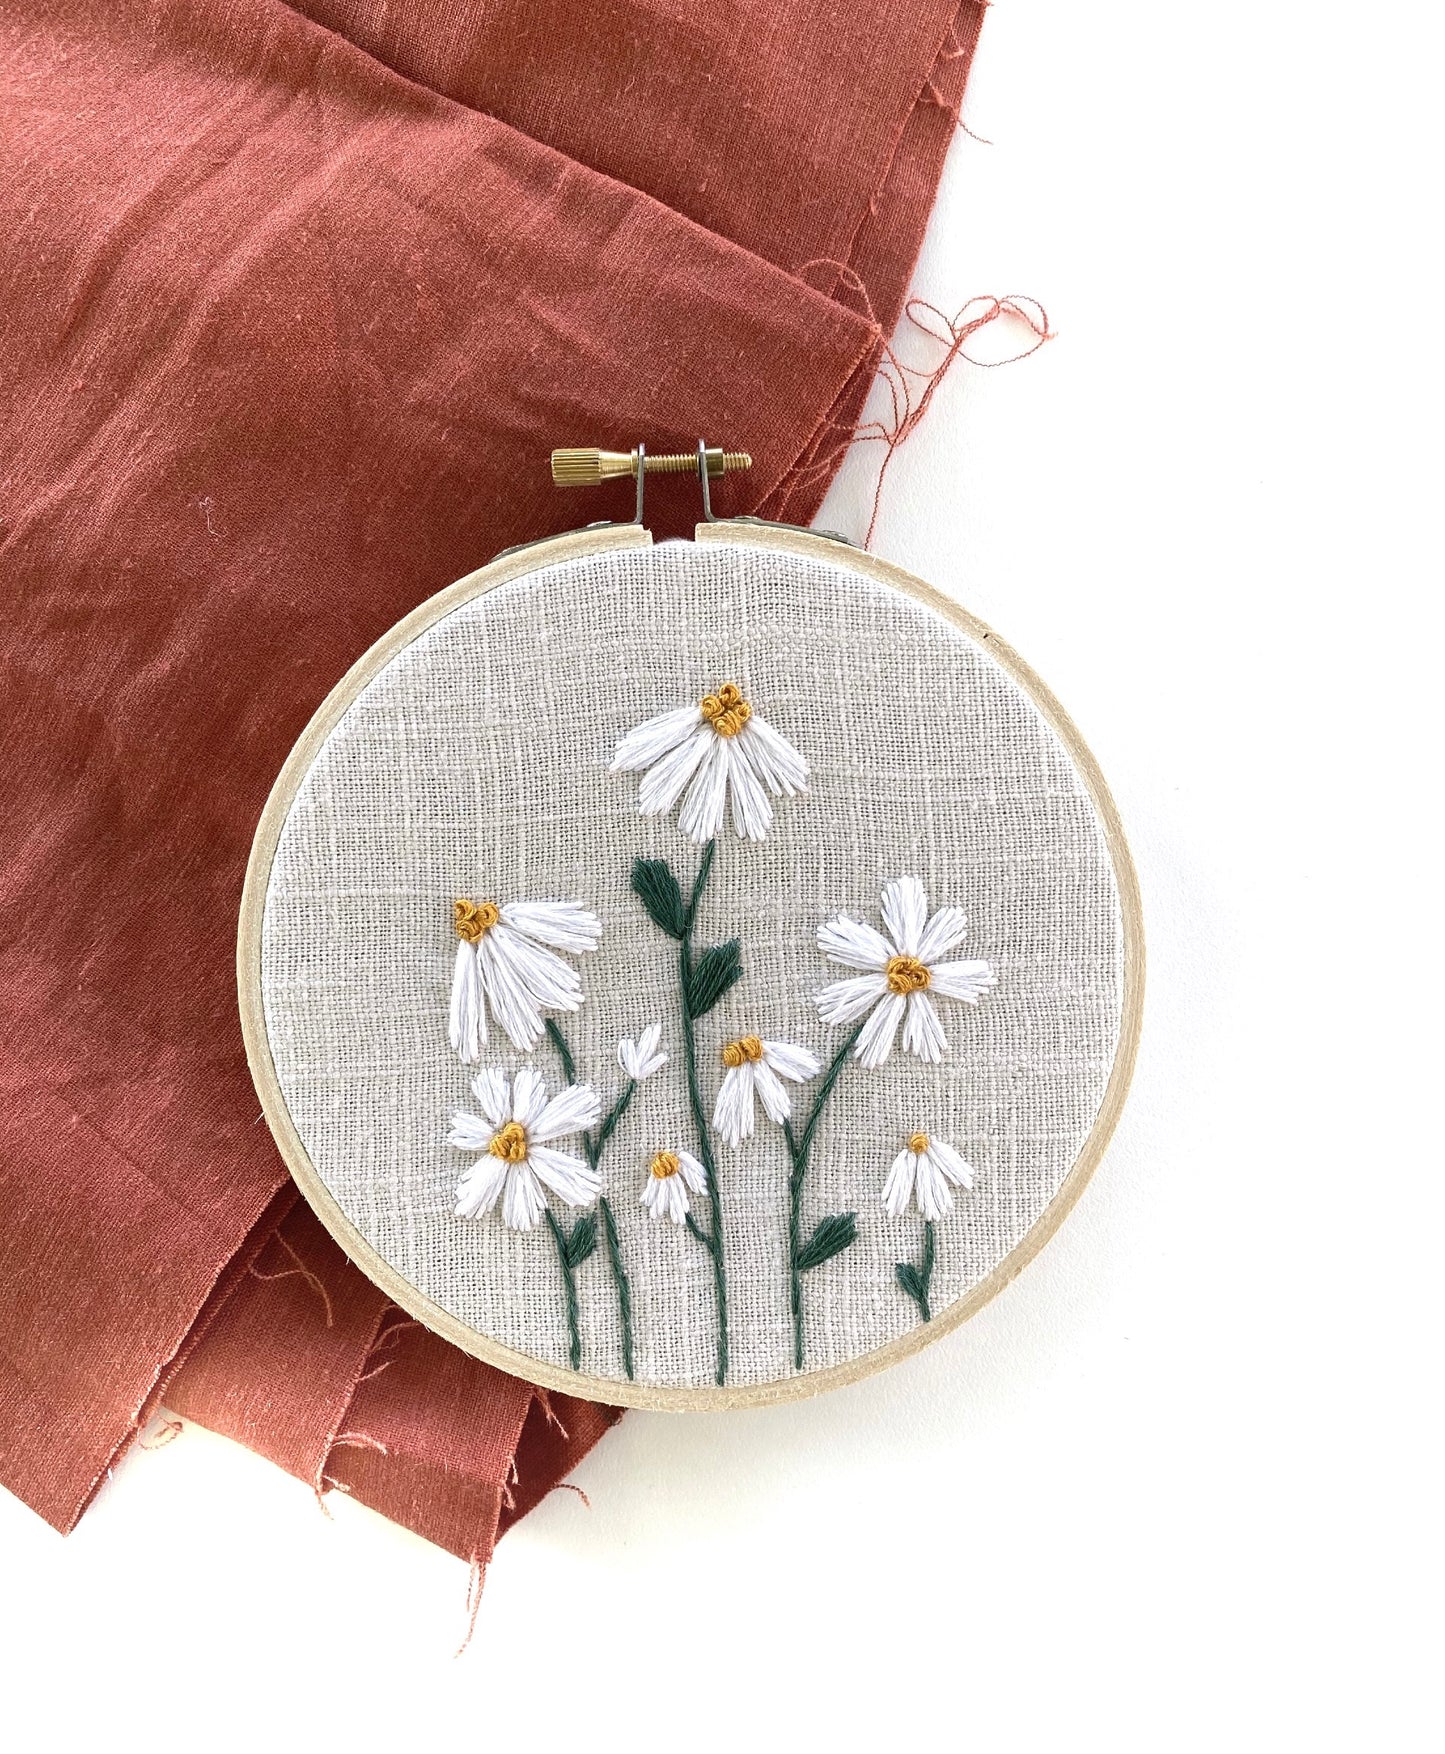 Little Daisies Embroidery Kit